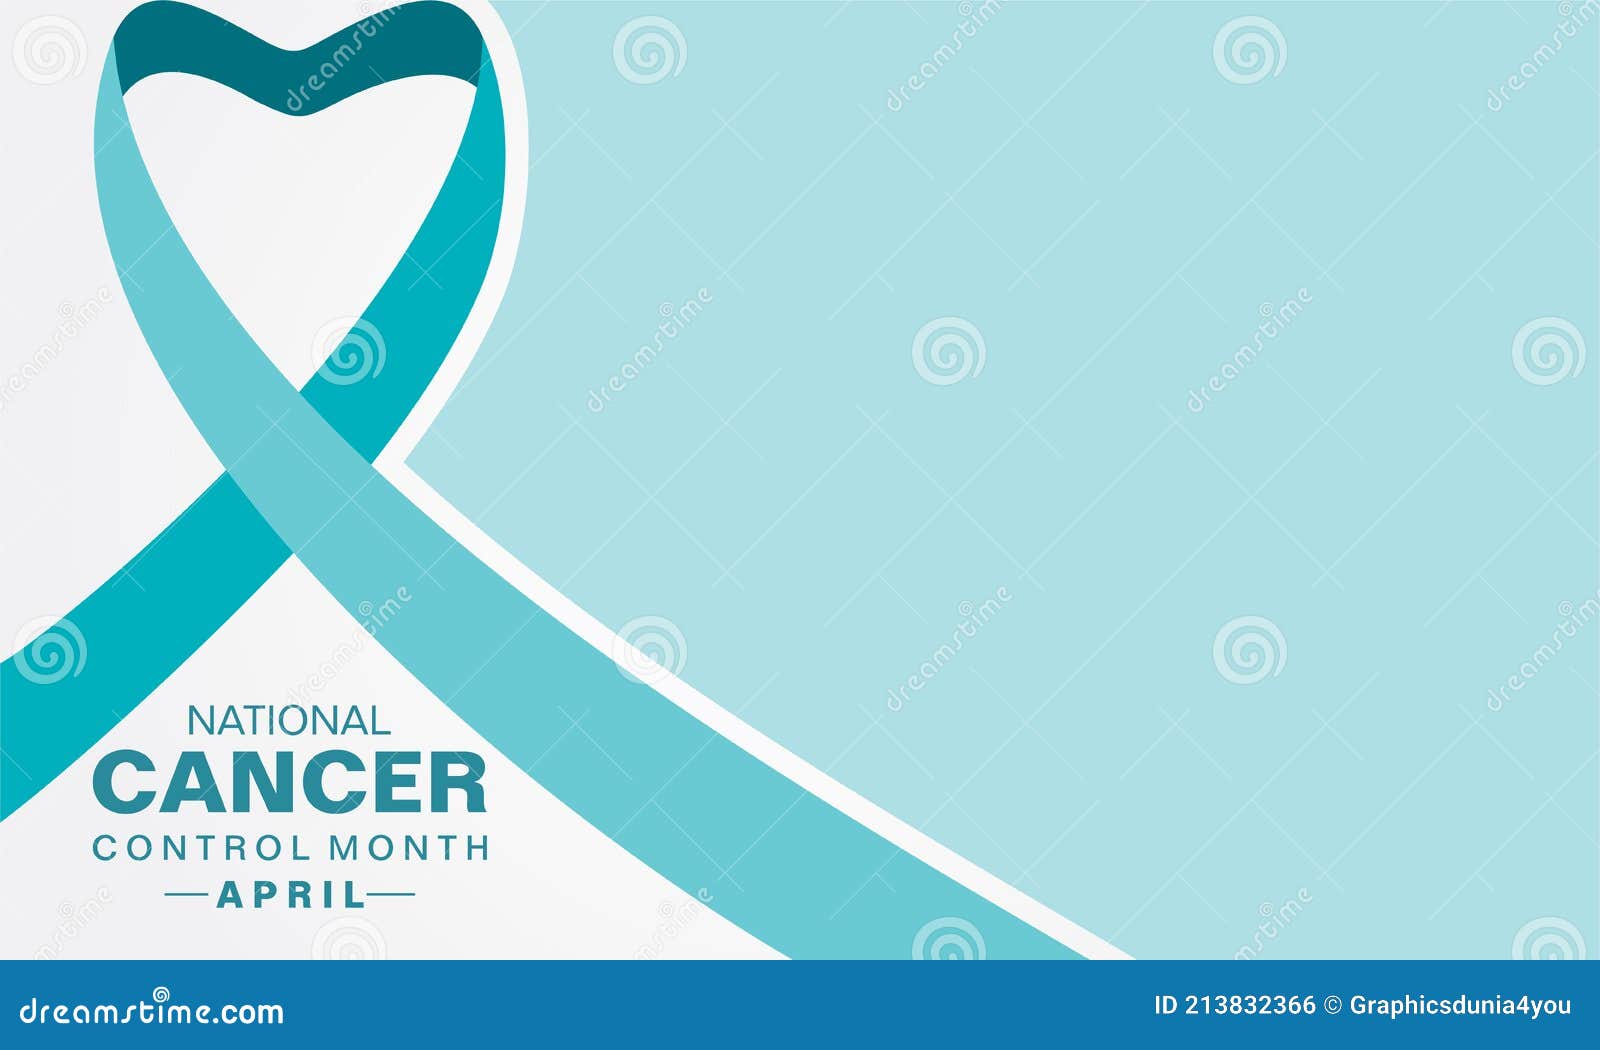 National Cancer Control Month Observed in April Every Year Stock Vector ...